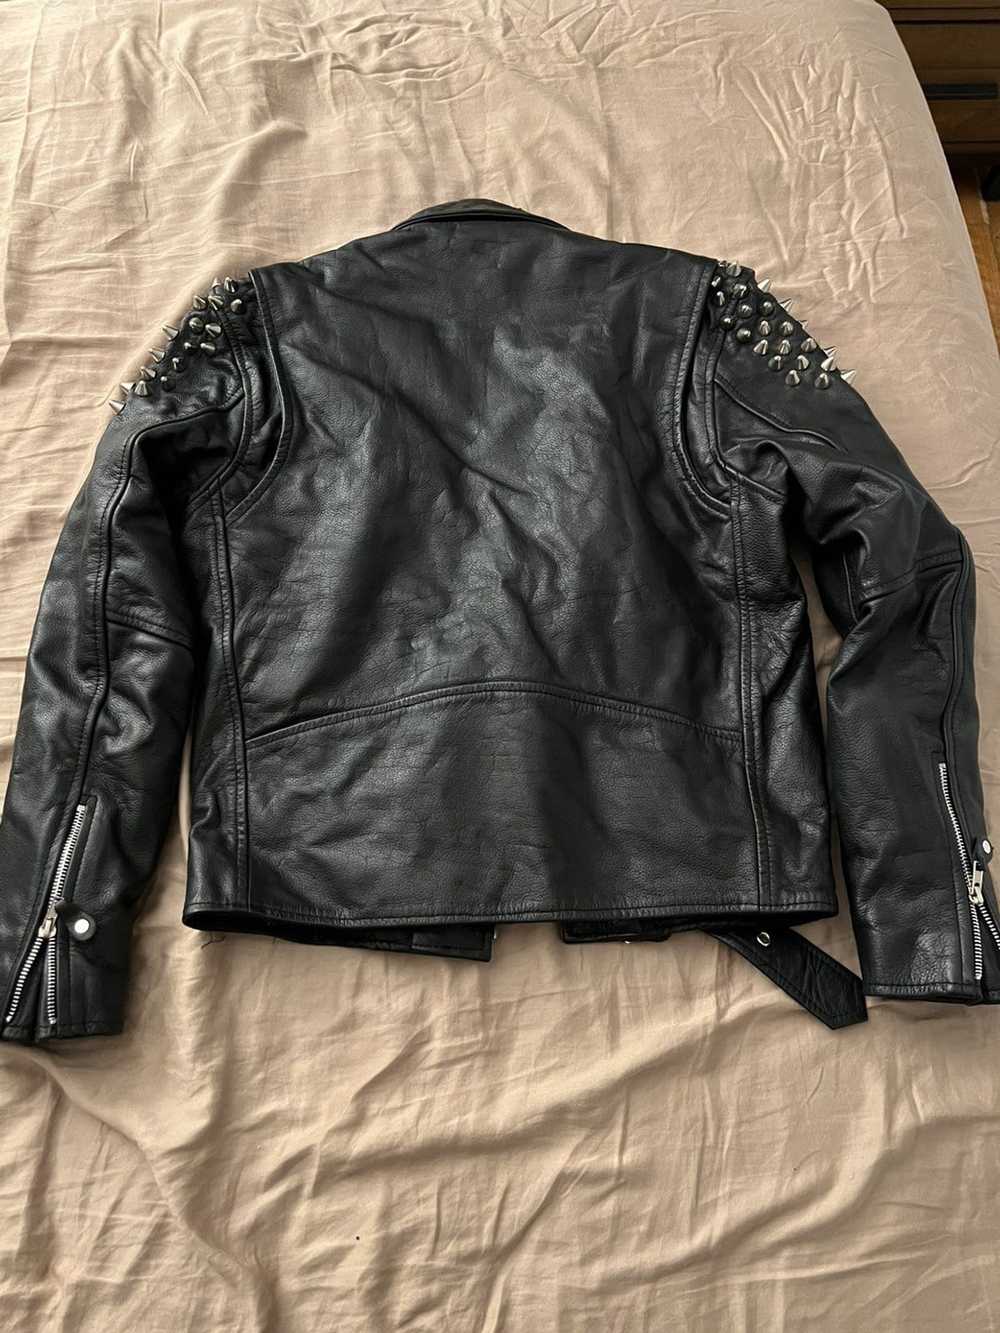 Designer Ragged Priest Leather Jacket with spikes - image 2